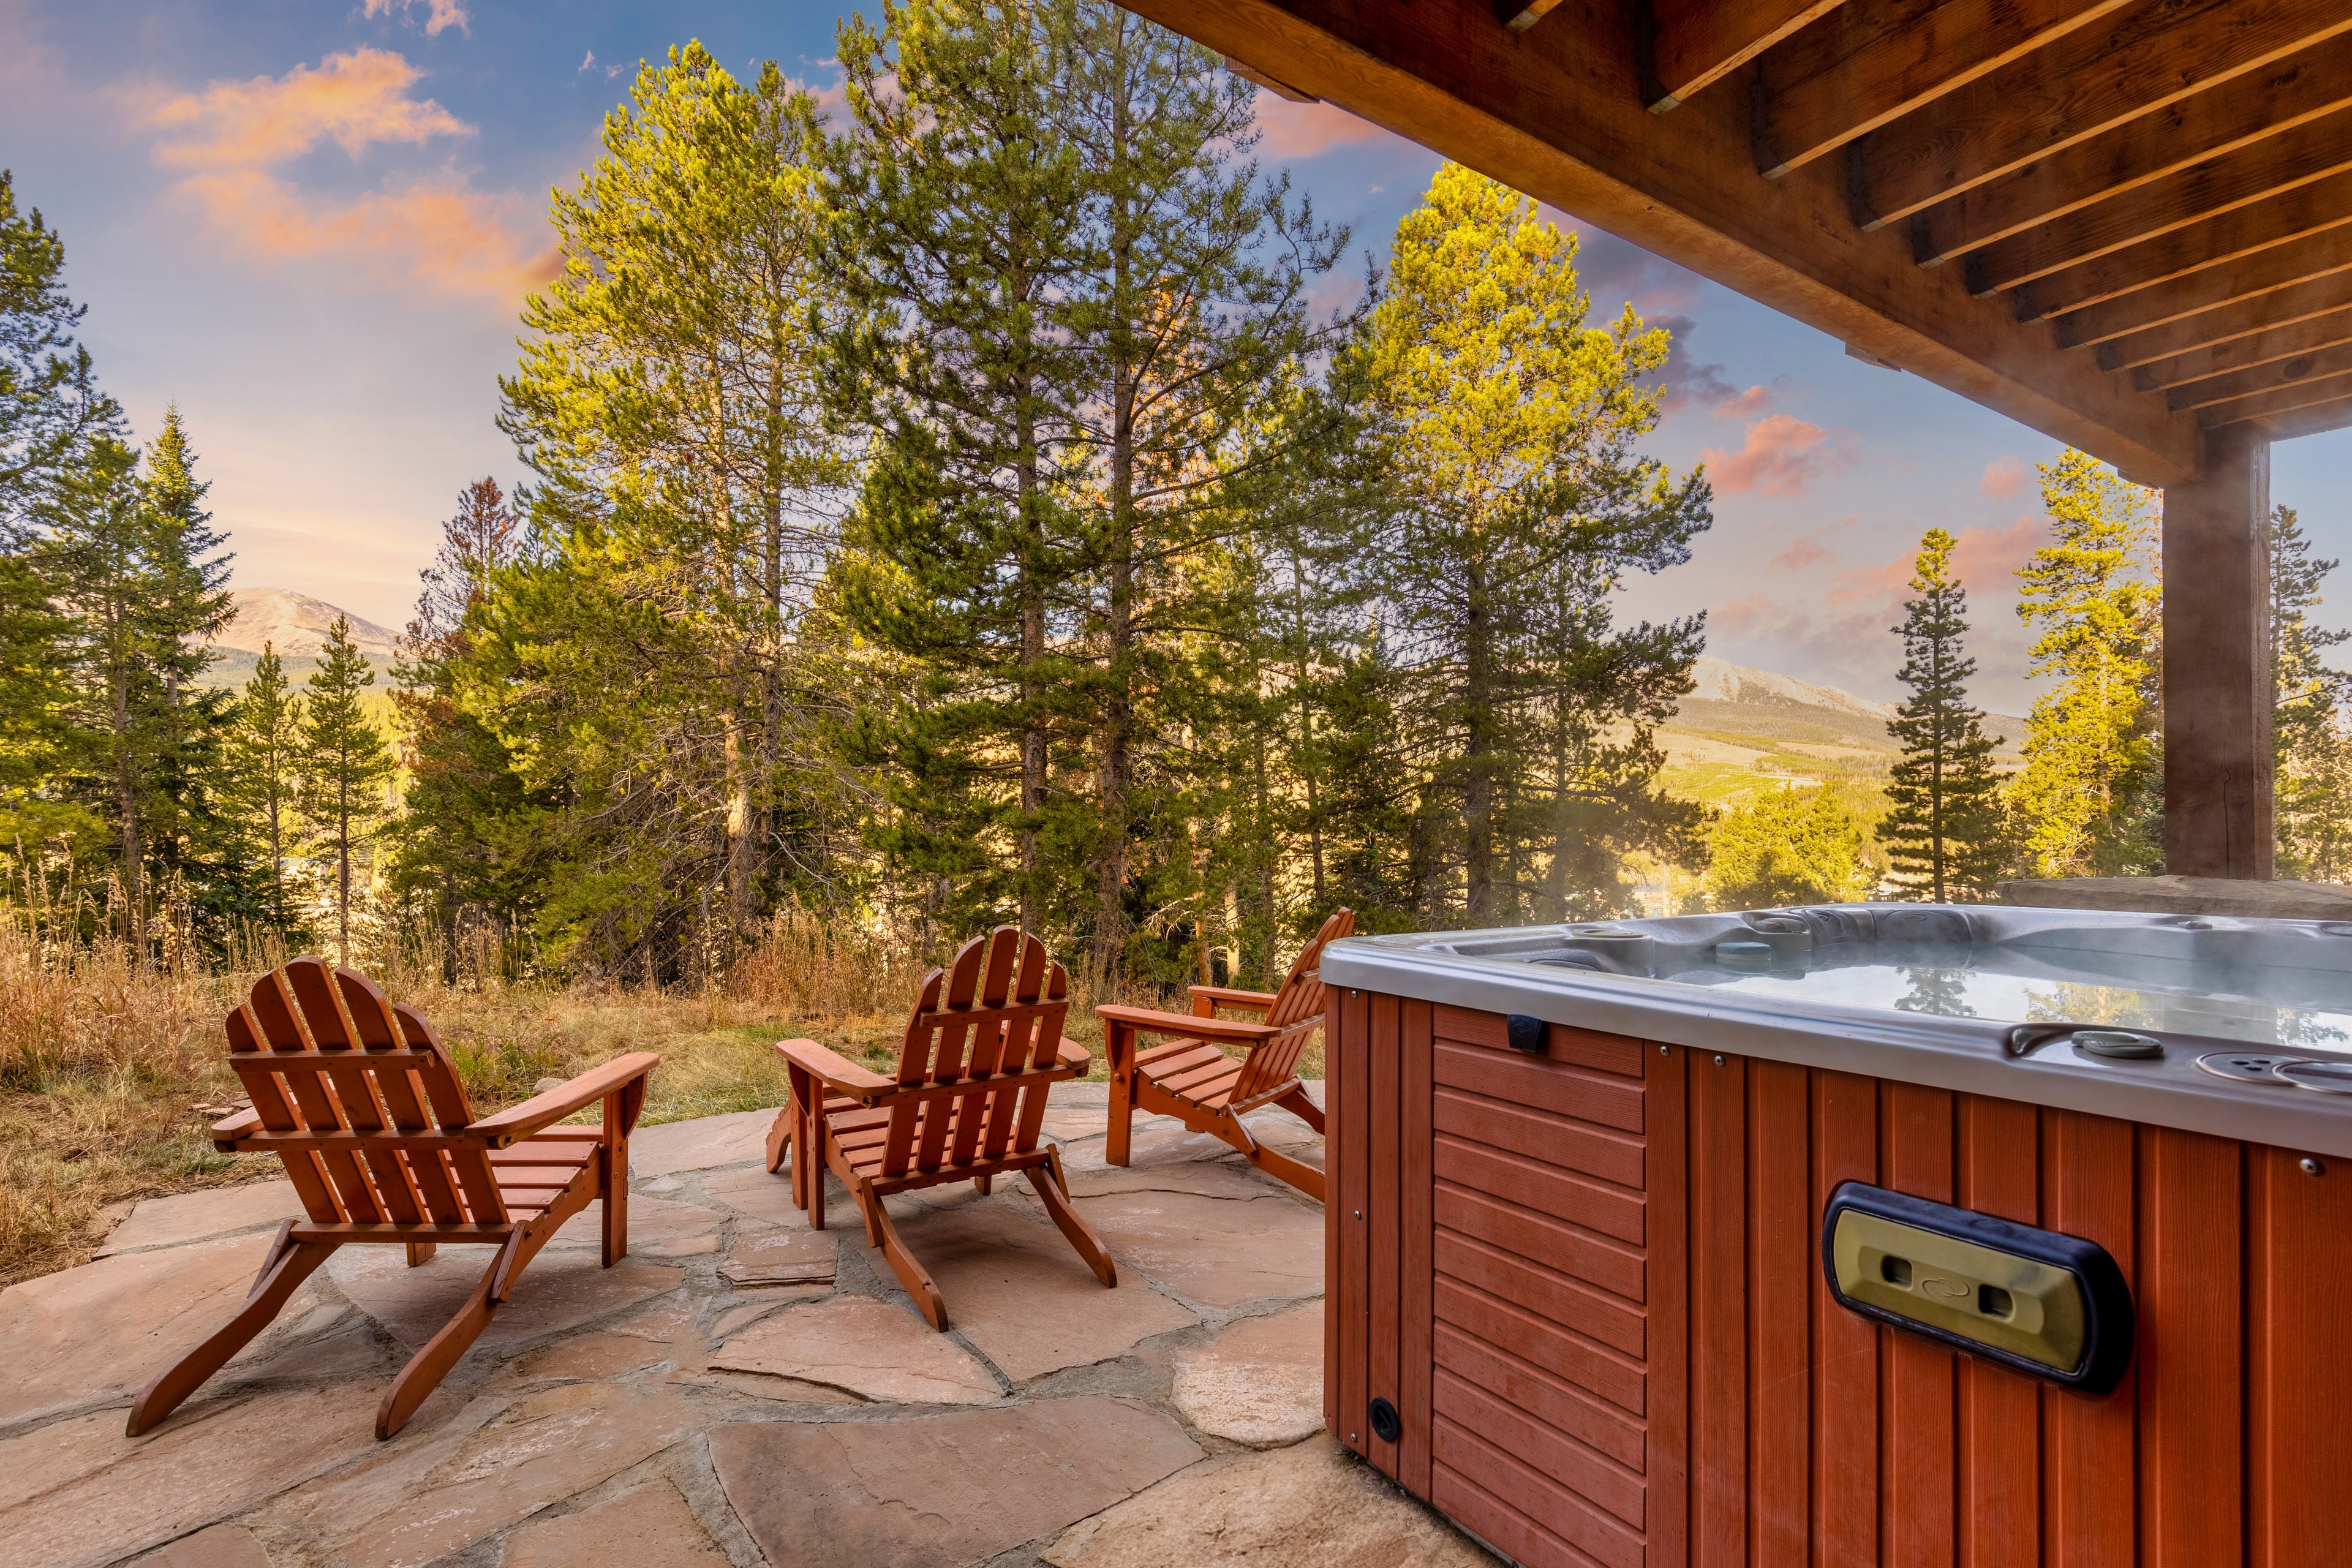 Hot tub, with a view.